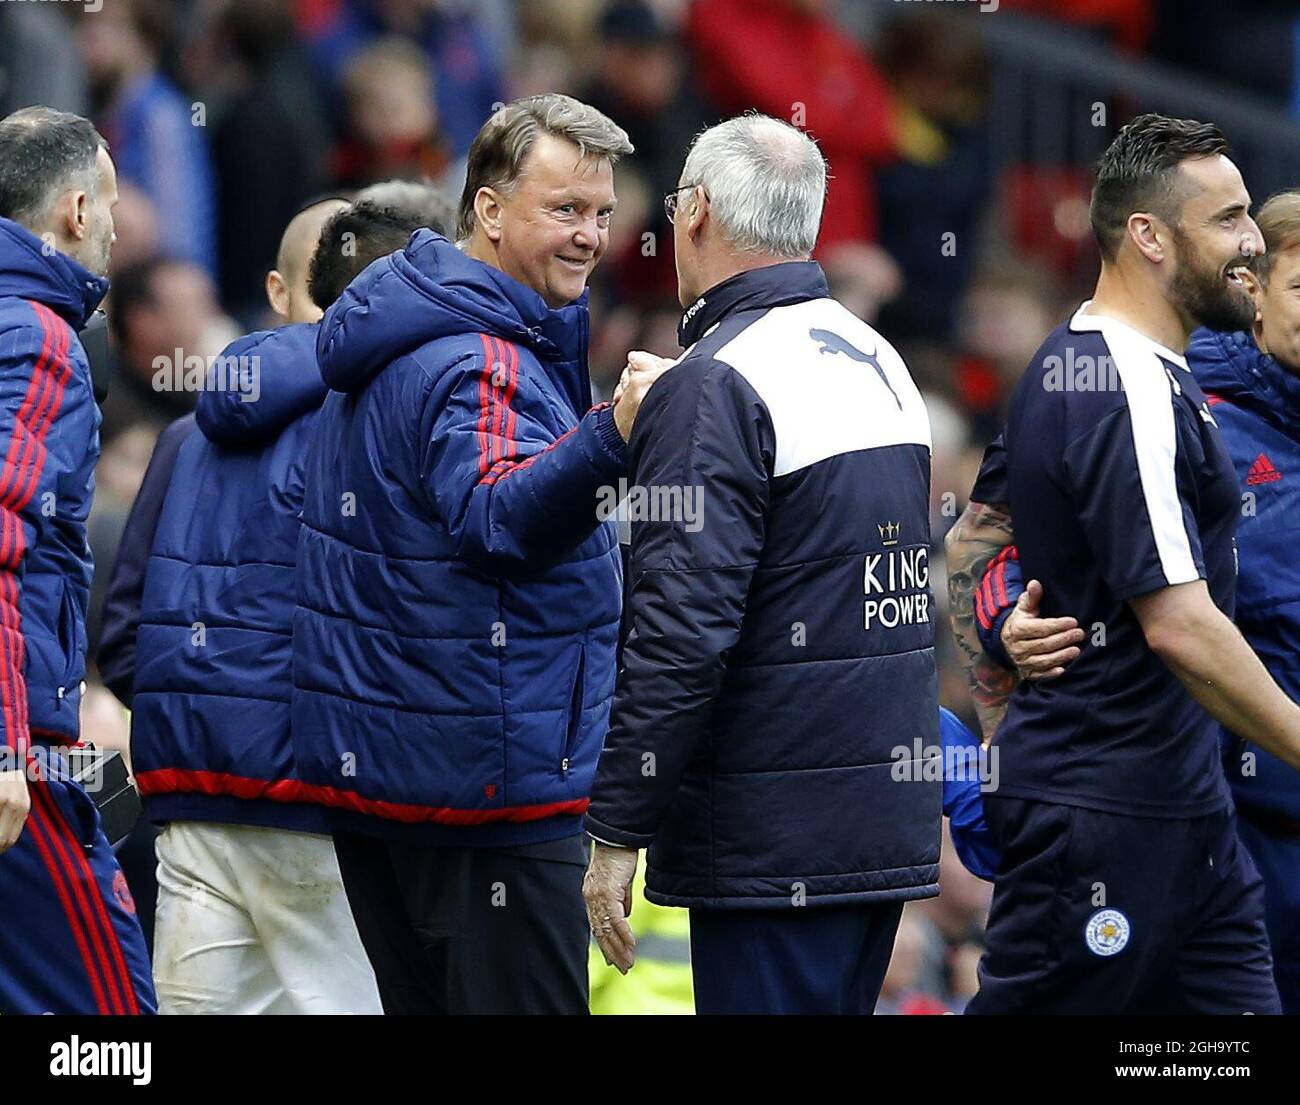 Louis van Gaal manager of Manchester United smiles as he shakes hands with Claudio Ranieri manager of Leicester City during the Barclays Premier League match at the Old Trafford Stadium. Photo credit should read: Simon Bellis/Sportimage via PA Images                                - Newcastle Utd vs Tottenham - St James' Park Stadium - Newcastle Upon Tyne - England - 19th April 2015 - Picture Phil Oldham/Sportimage Stock Photo